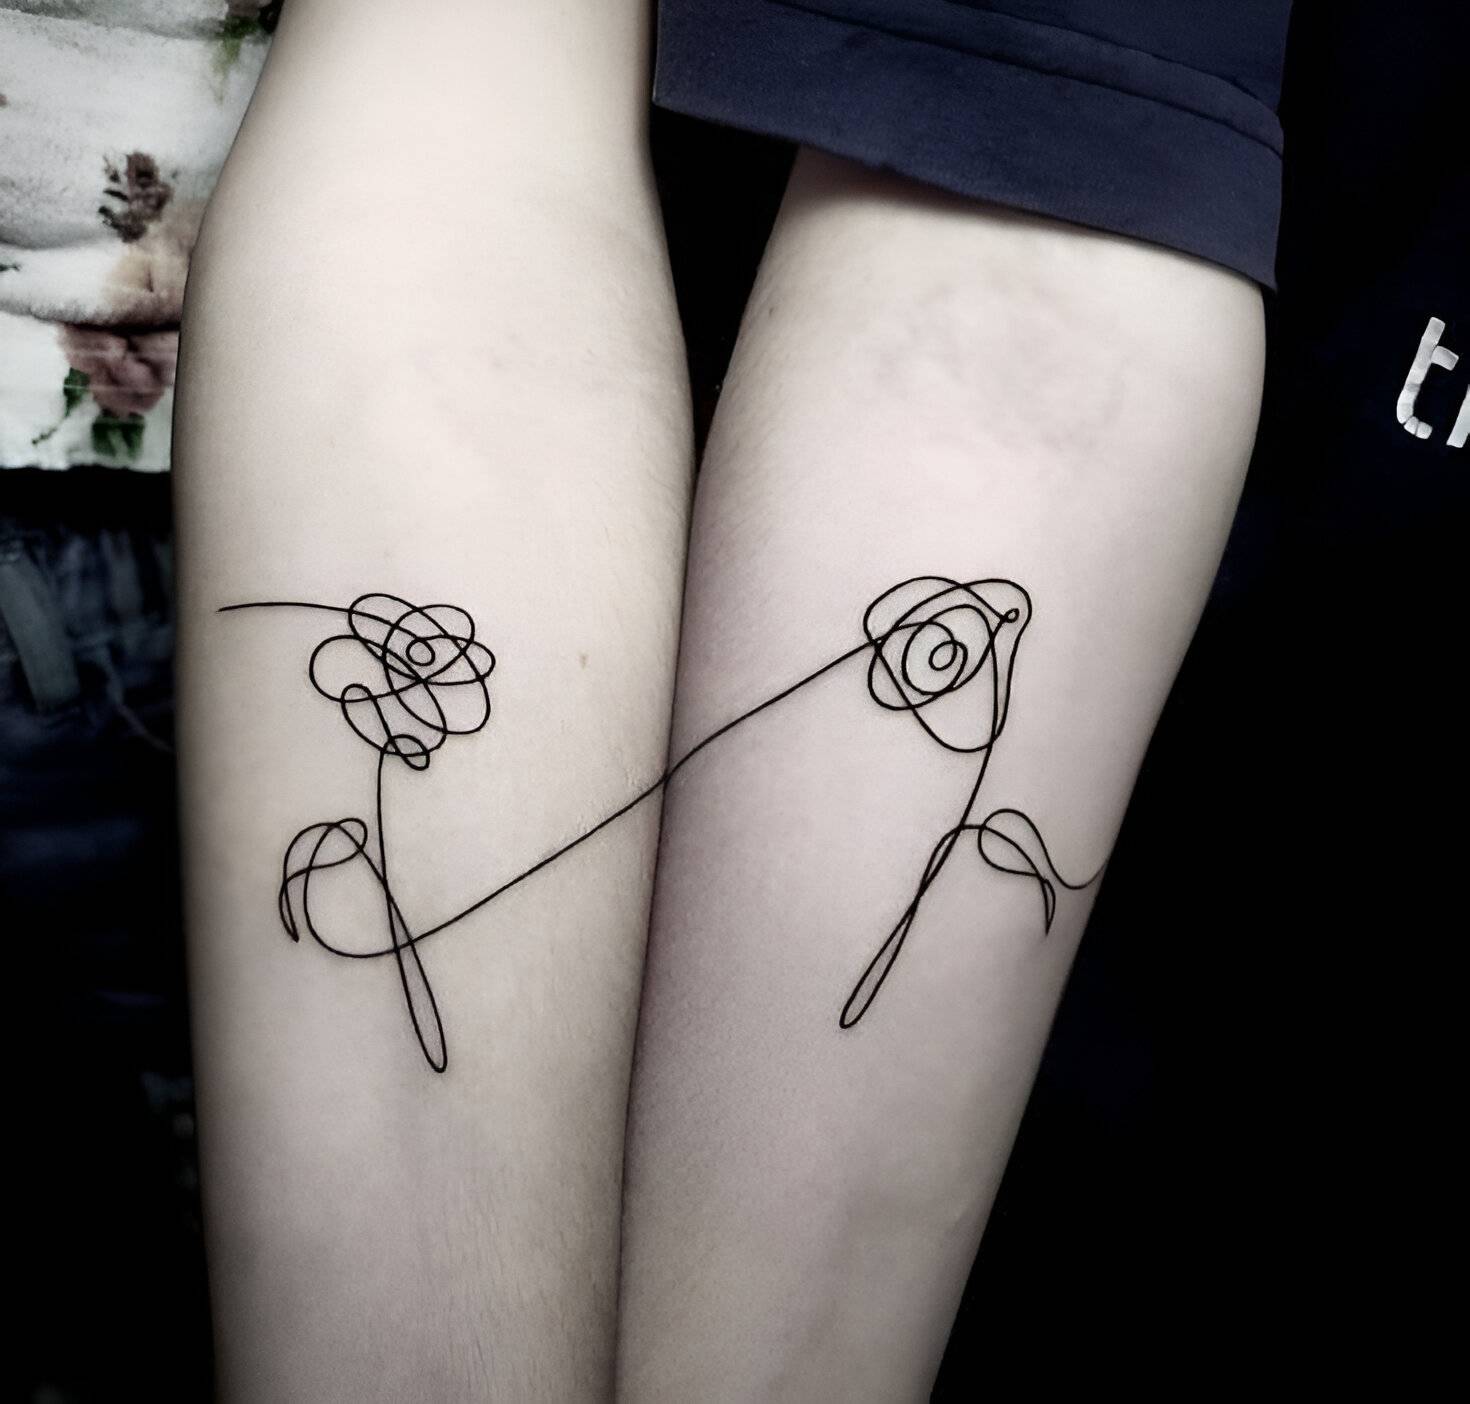 27 Feminine Best Friend Tattoos With The Perfect Elegant Touch 9